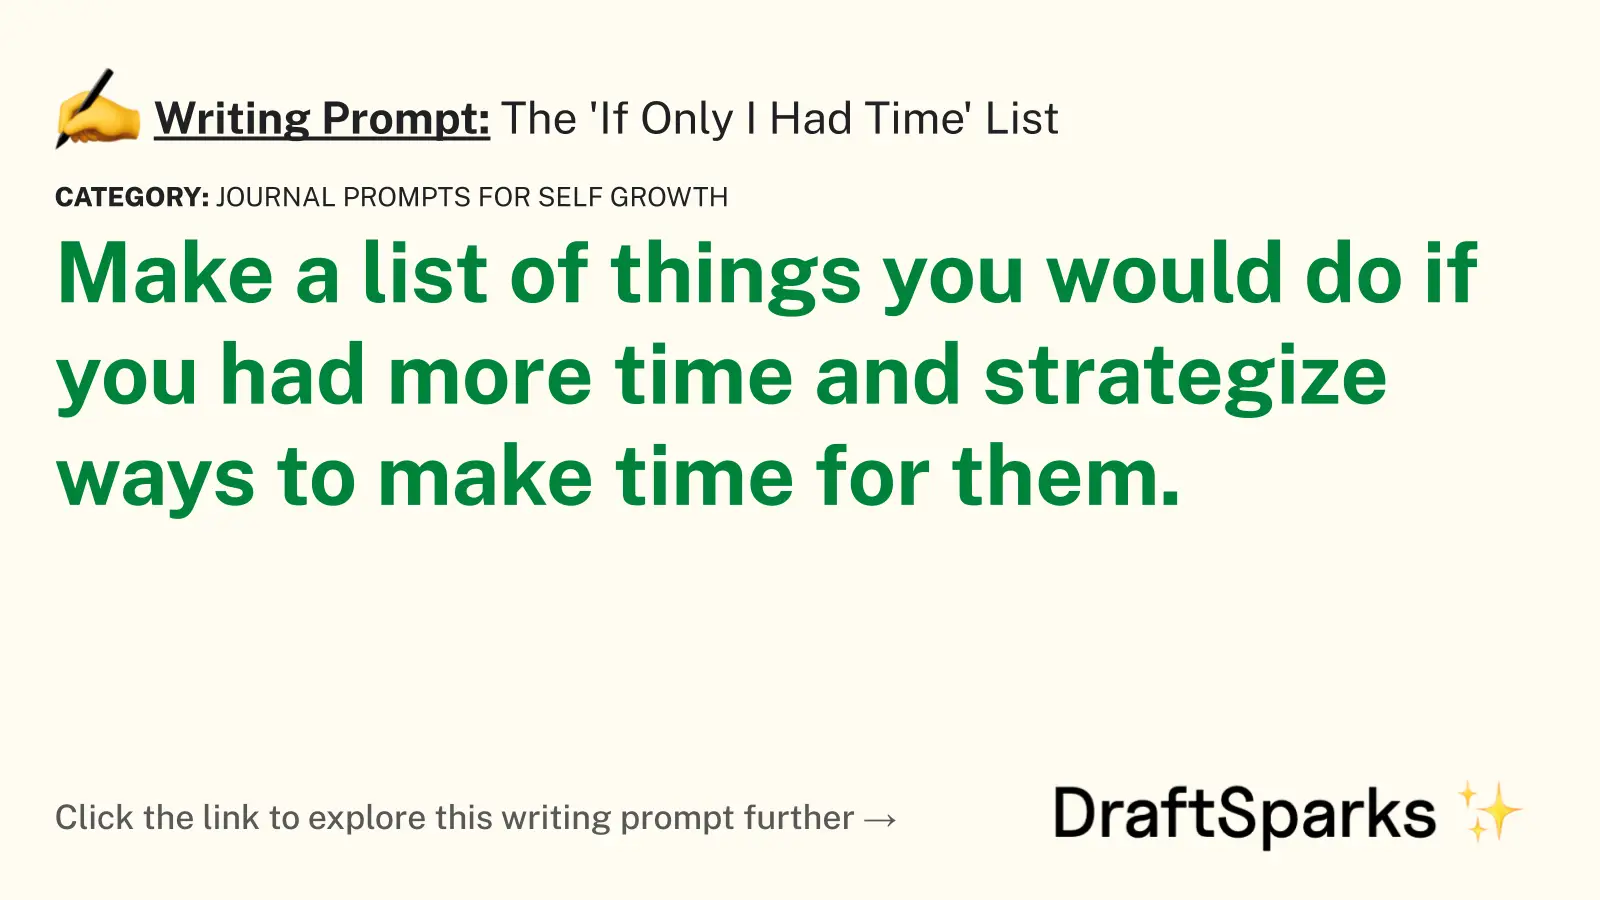 The ‘If Only I Had Time’ List